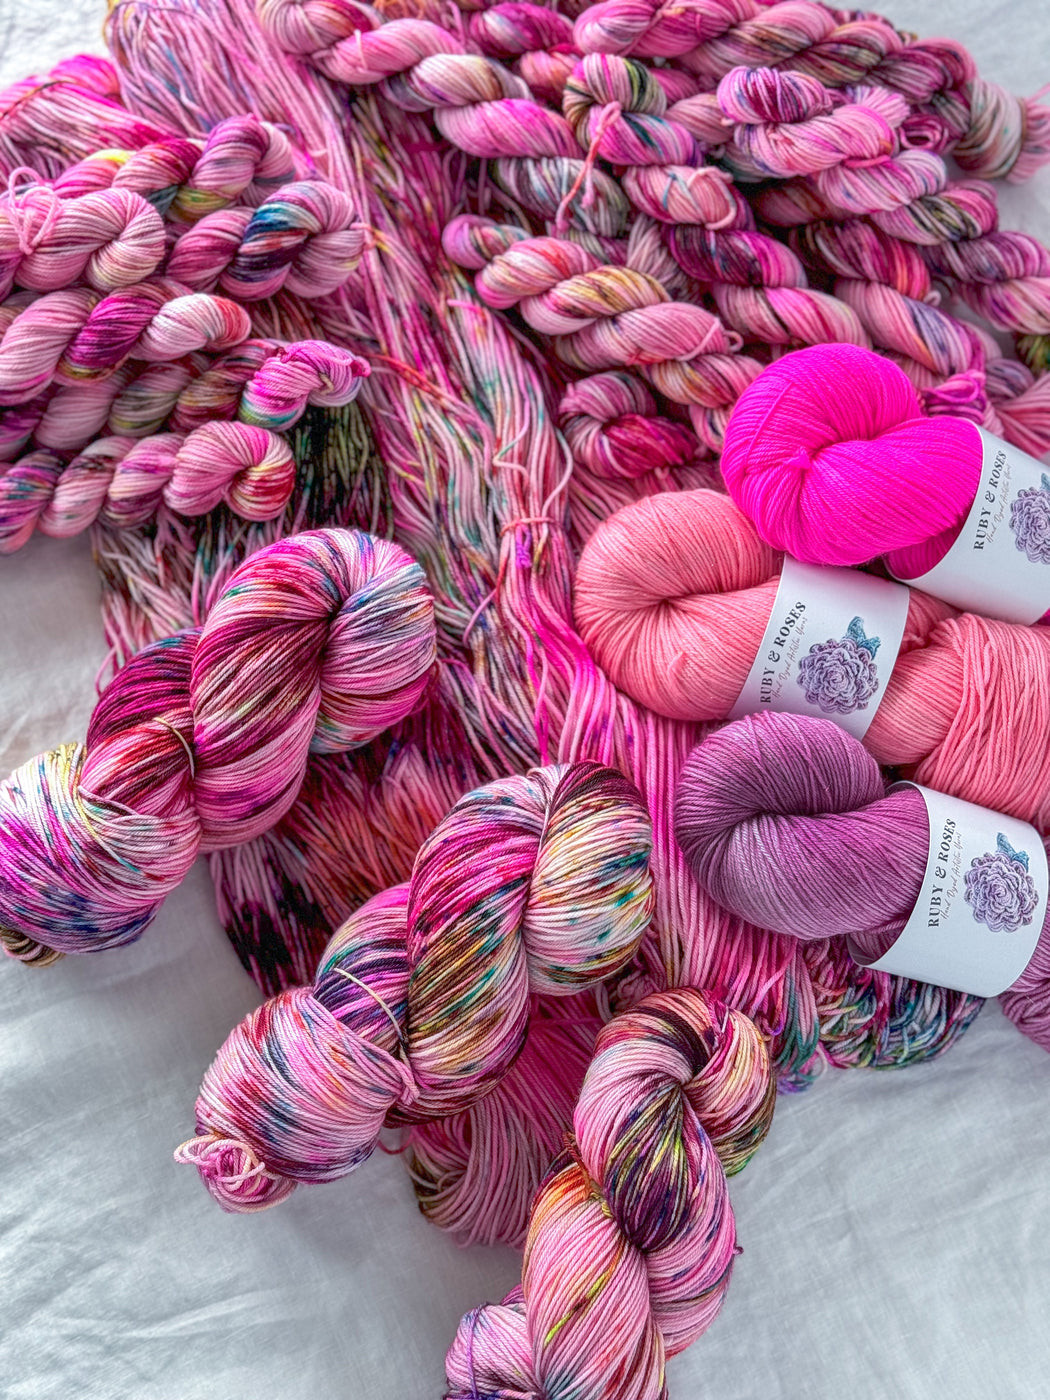 Full Skein /// OOAK May Colorway - Ruby and Roses Yarn - Hand Dyed Yarn